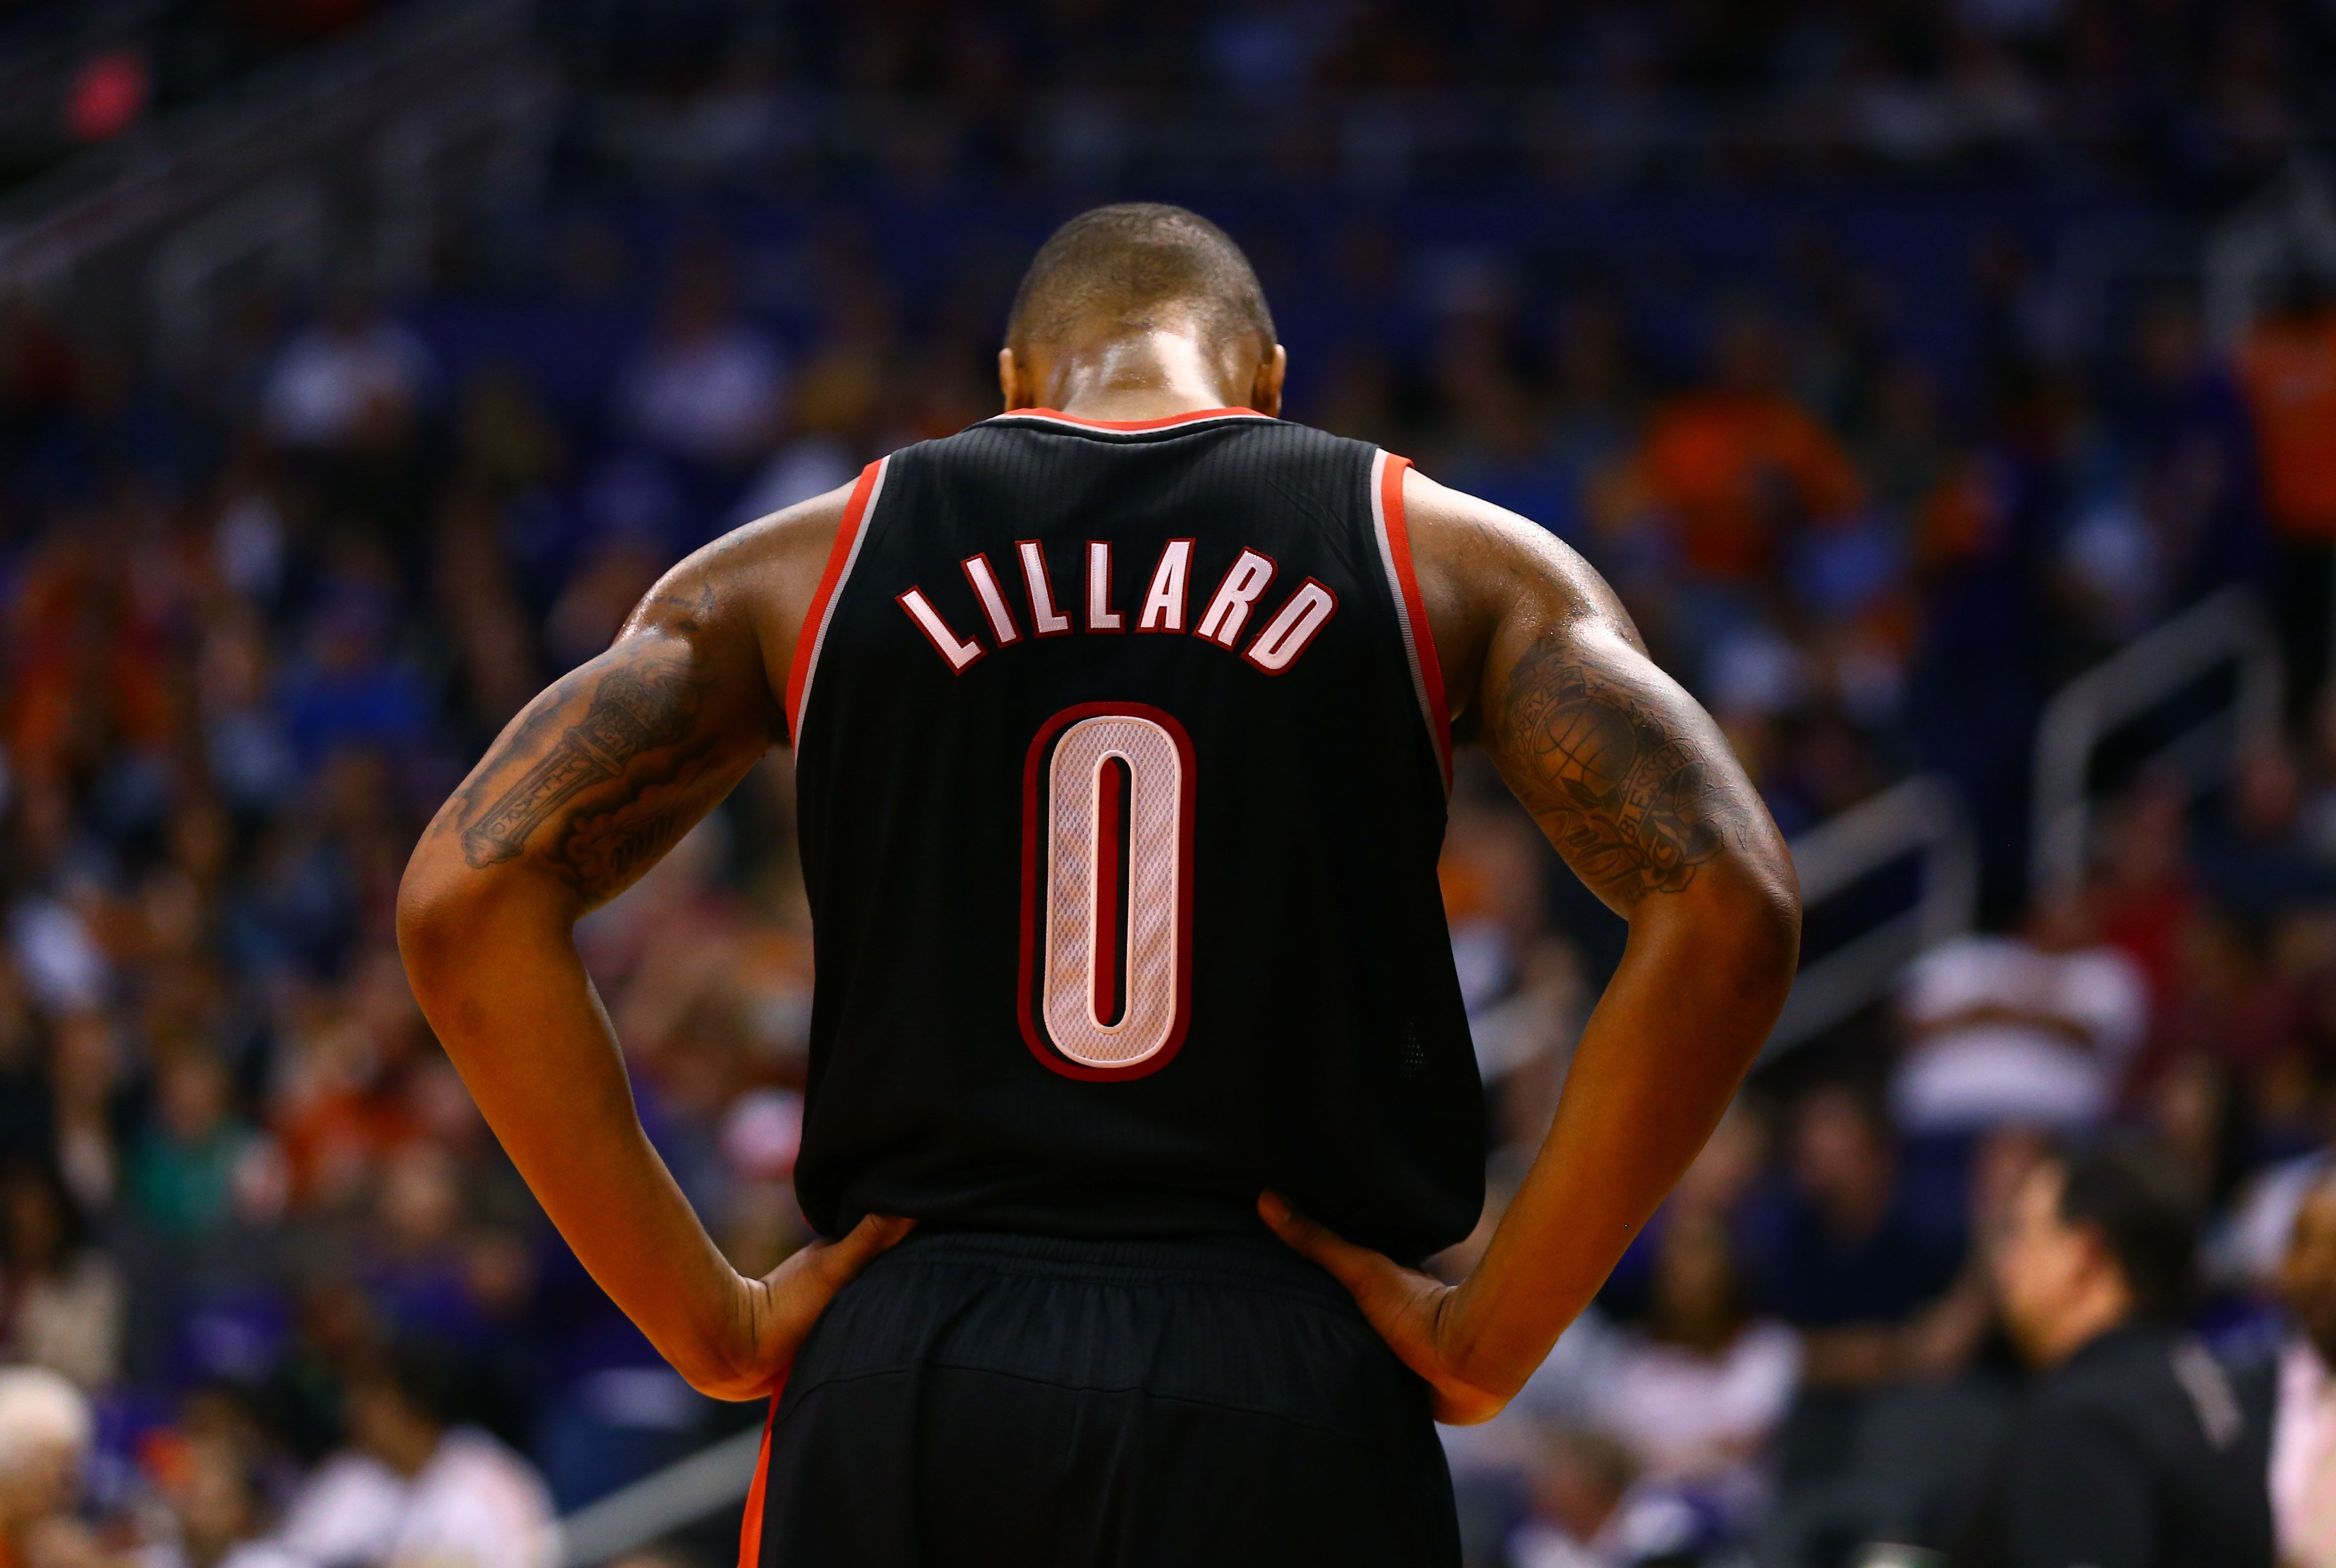 Lillard chose the number 0 to represent his hometown Oakland